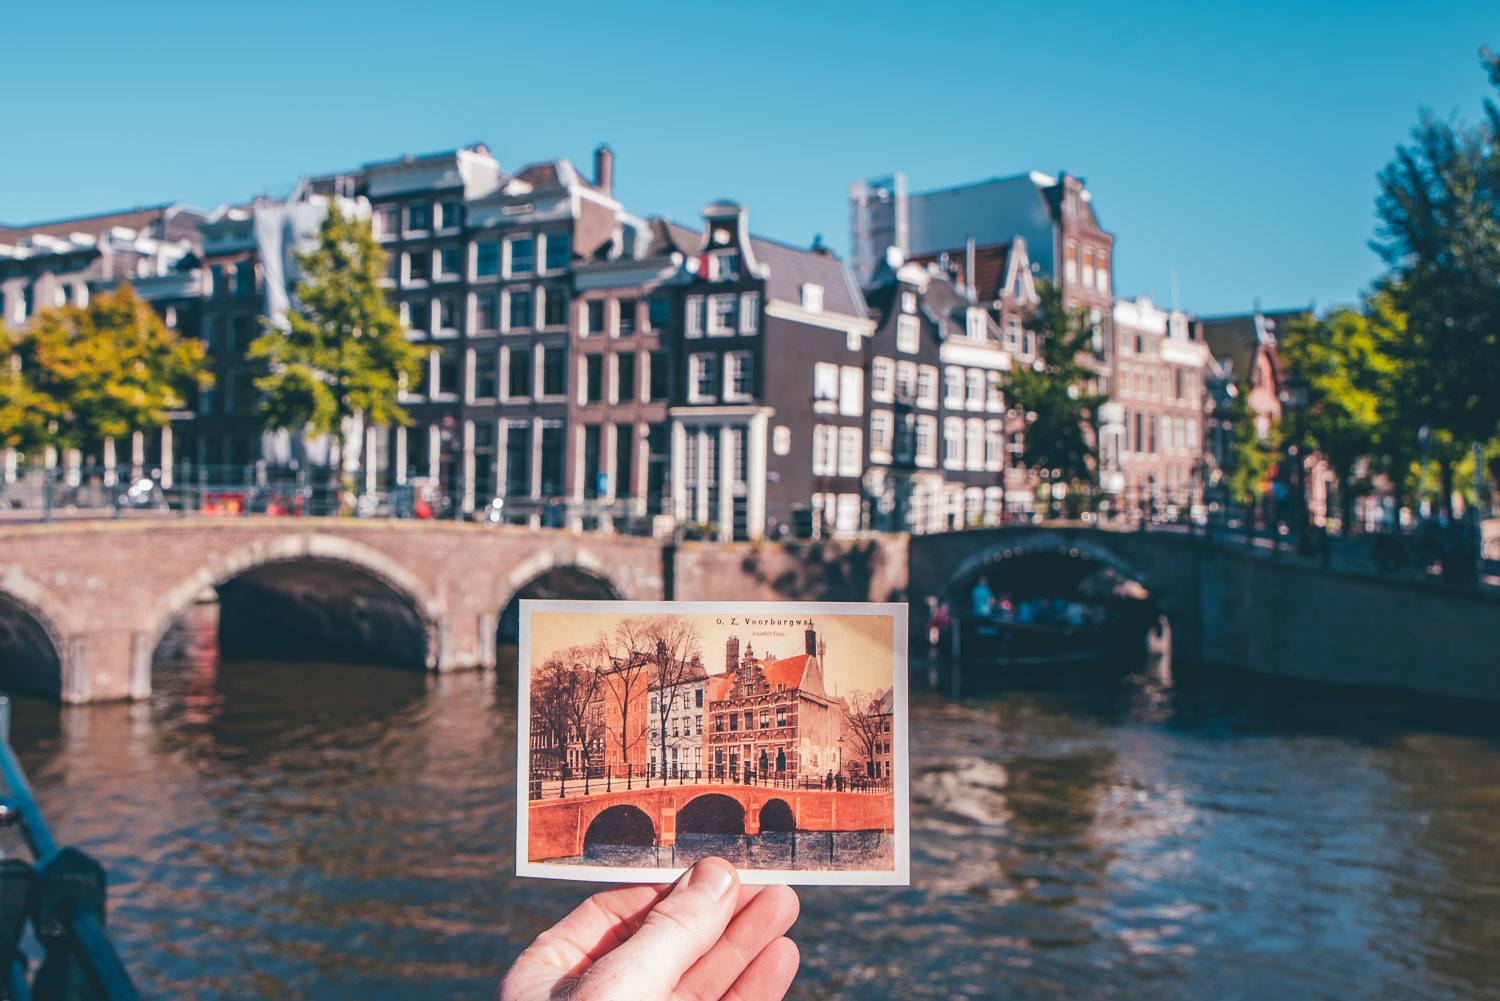 Enjoy an Amsterdam canal cruise - Europe in October